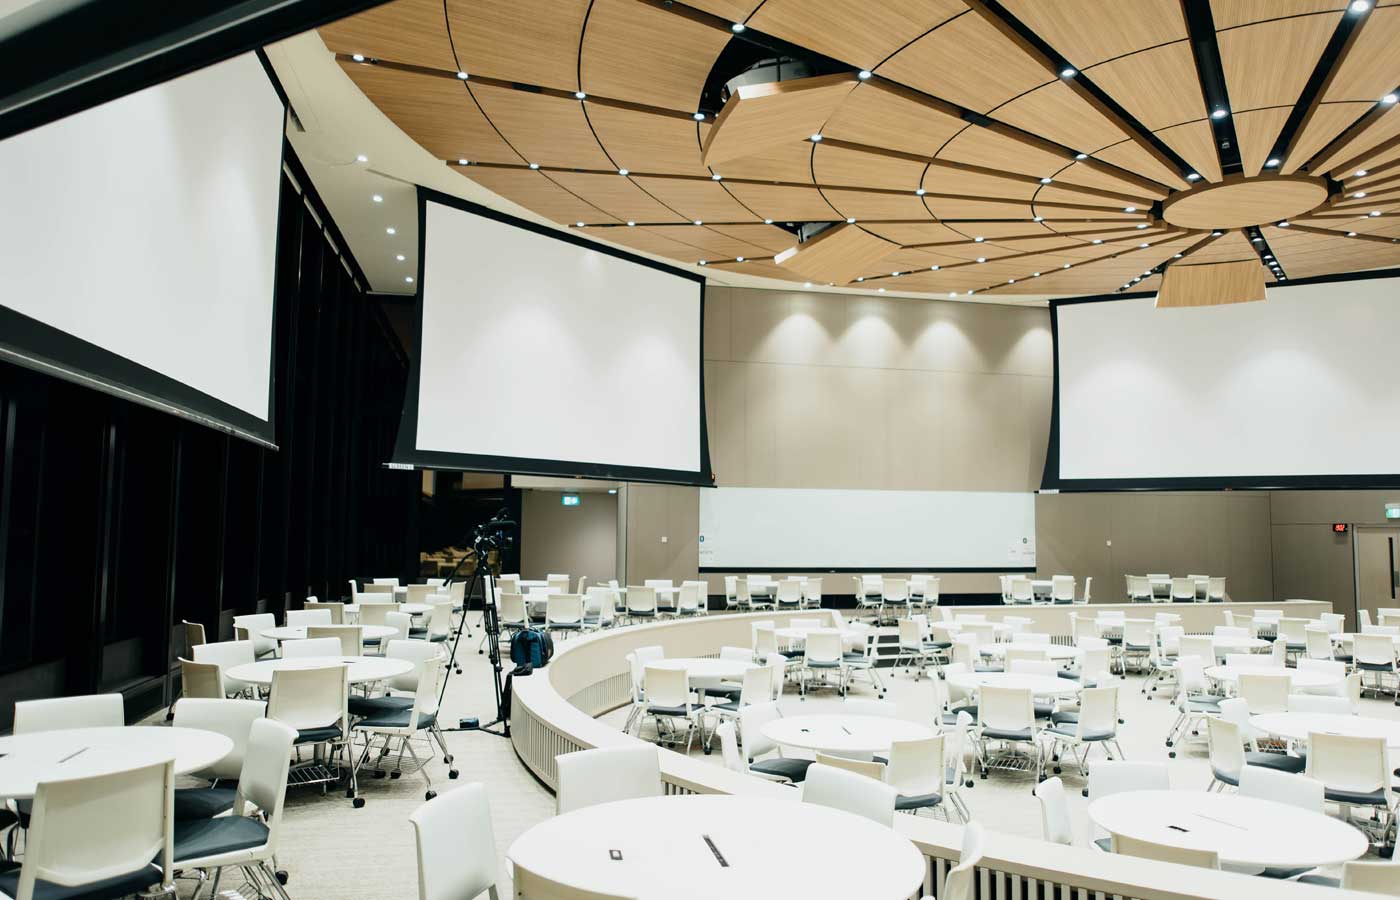 Planning a corporate event - Shows an empty conference hall before the event